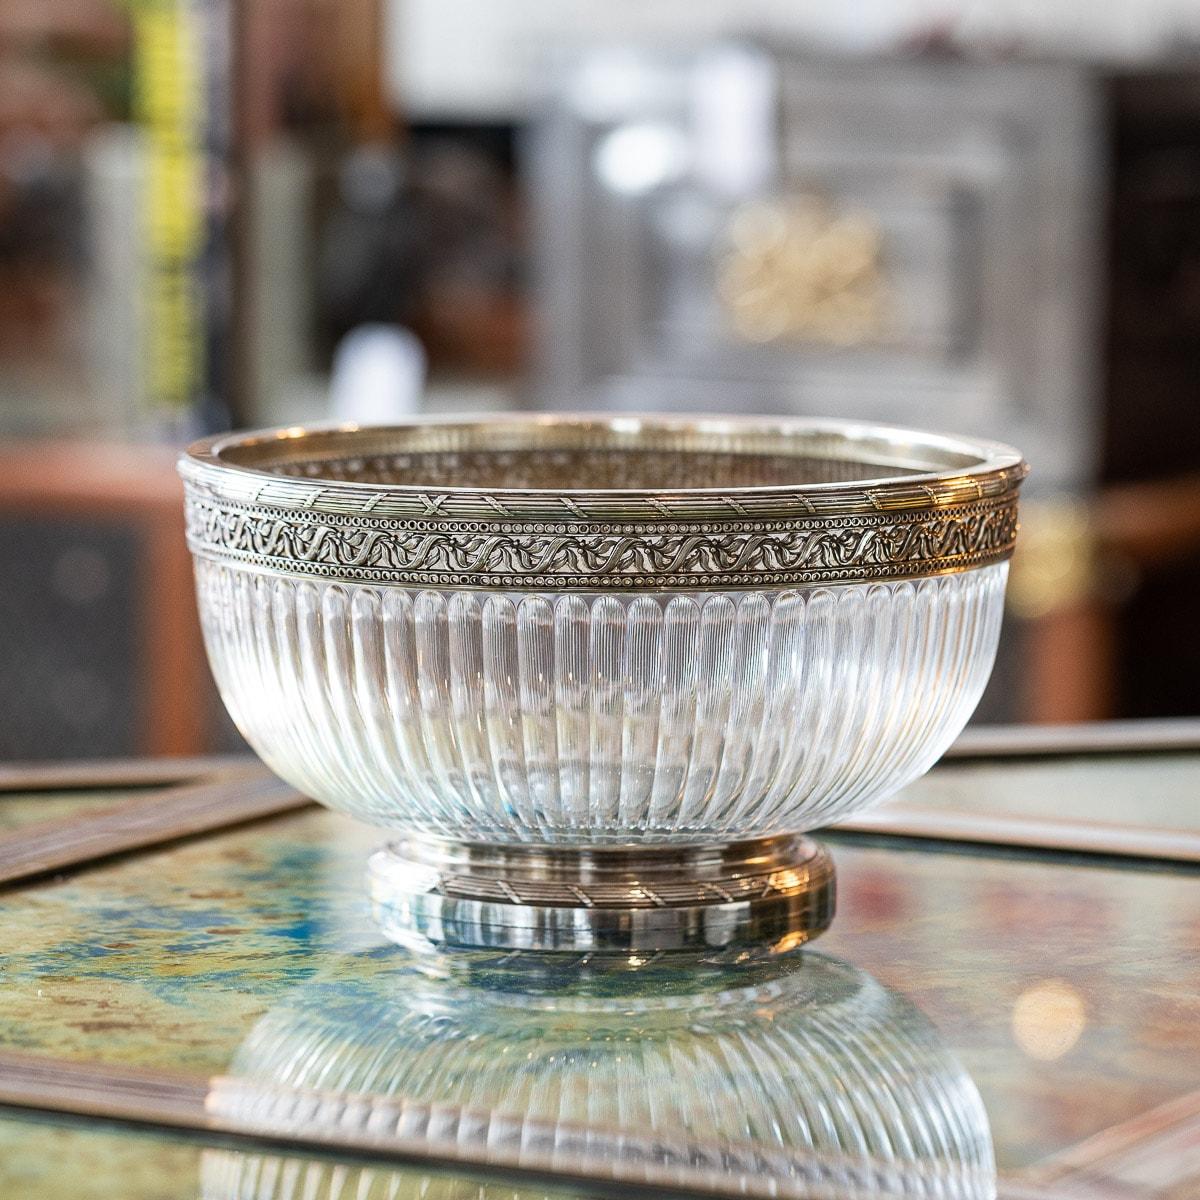 Antique early-20th century French Empire style solid silver large centerpiece bowl. The inverted fluted glass, mounted with a pierced silver rim and decorated with flowers, beads, ribbon tied, reeded boarders with x-junctions, standing on a flat